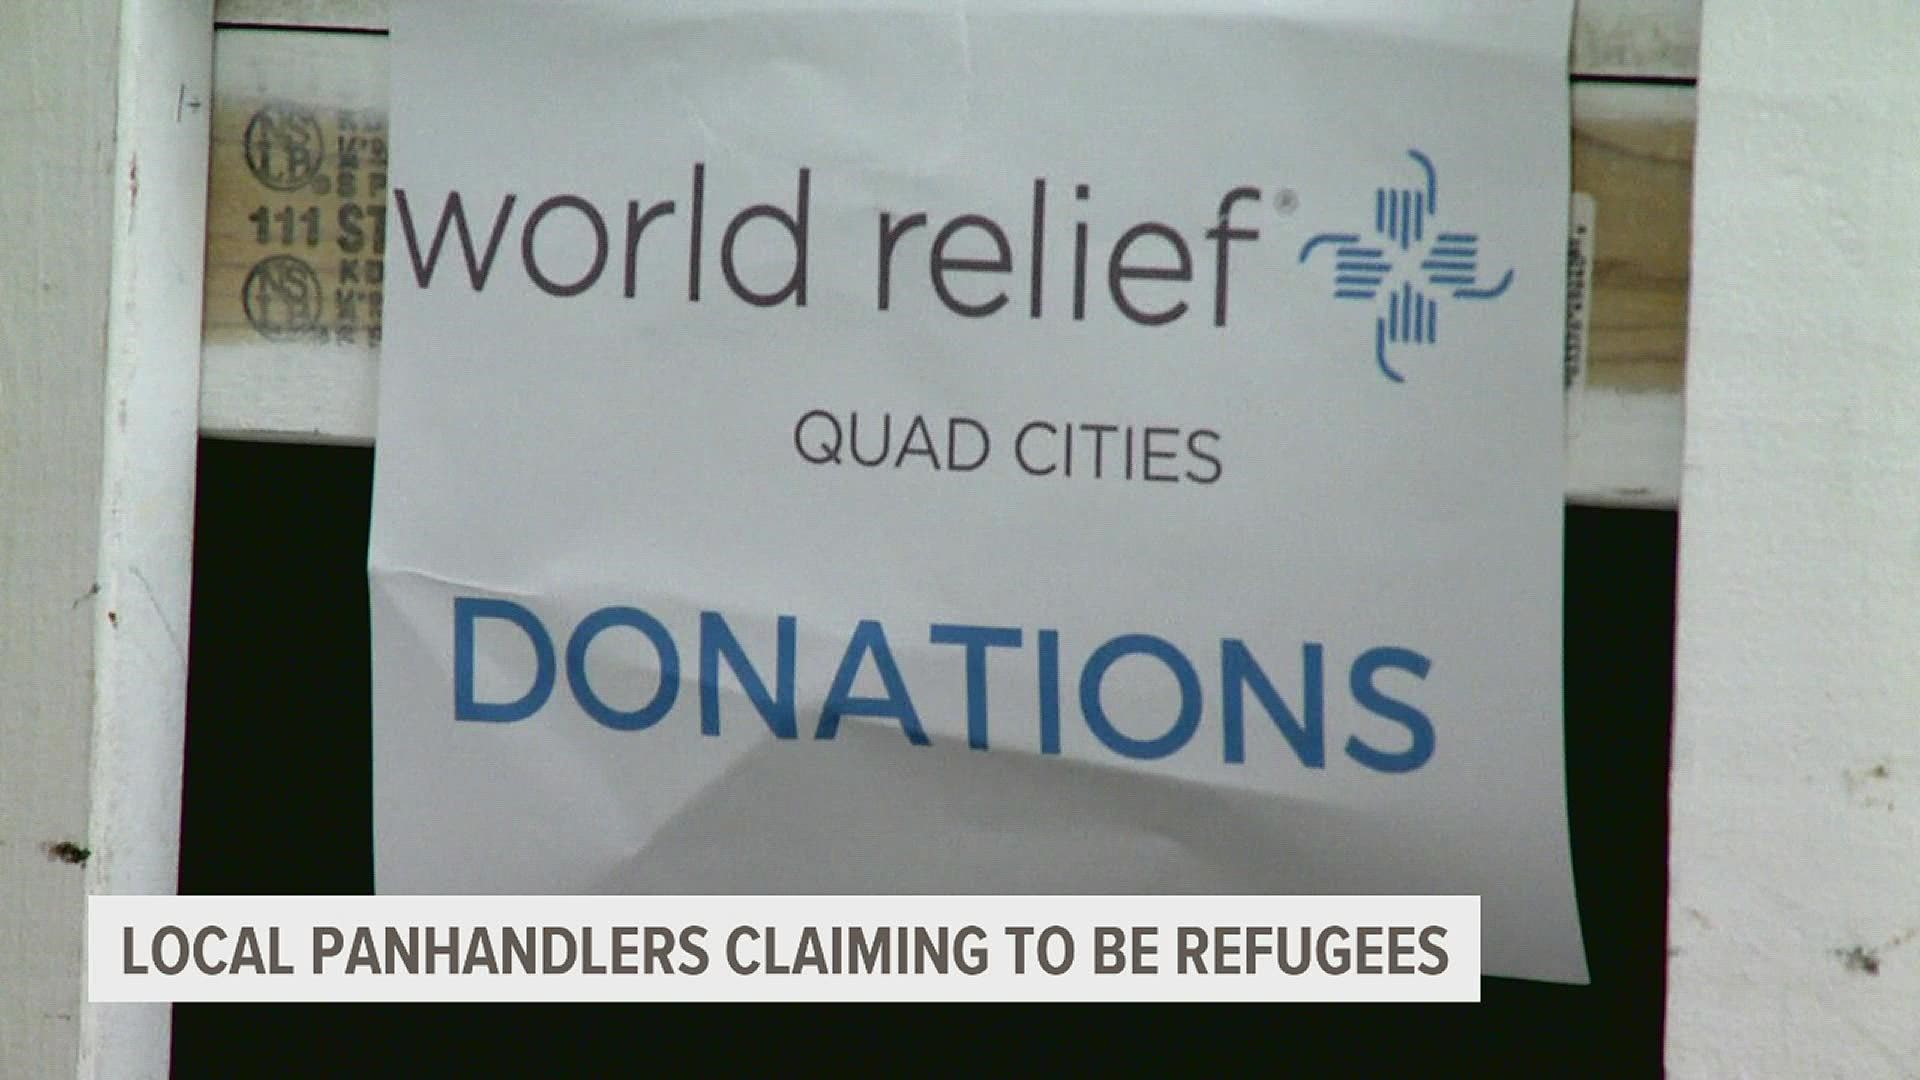 World Relief Quad Cities said its case workers have tried reaching out to several of these groups, but so far they have ran away or refused aid.